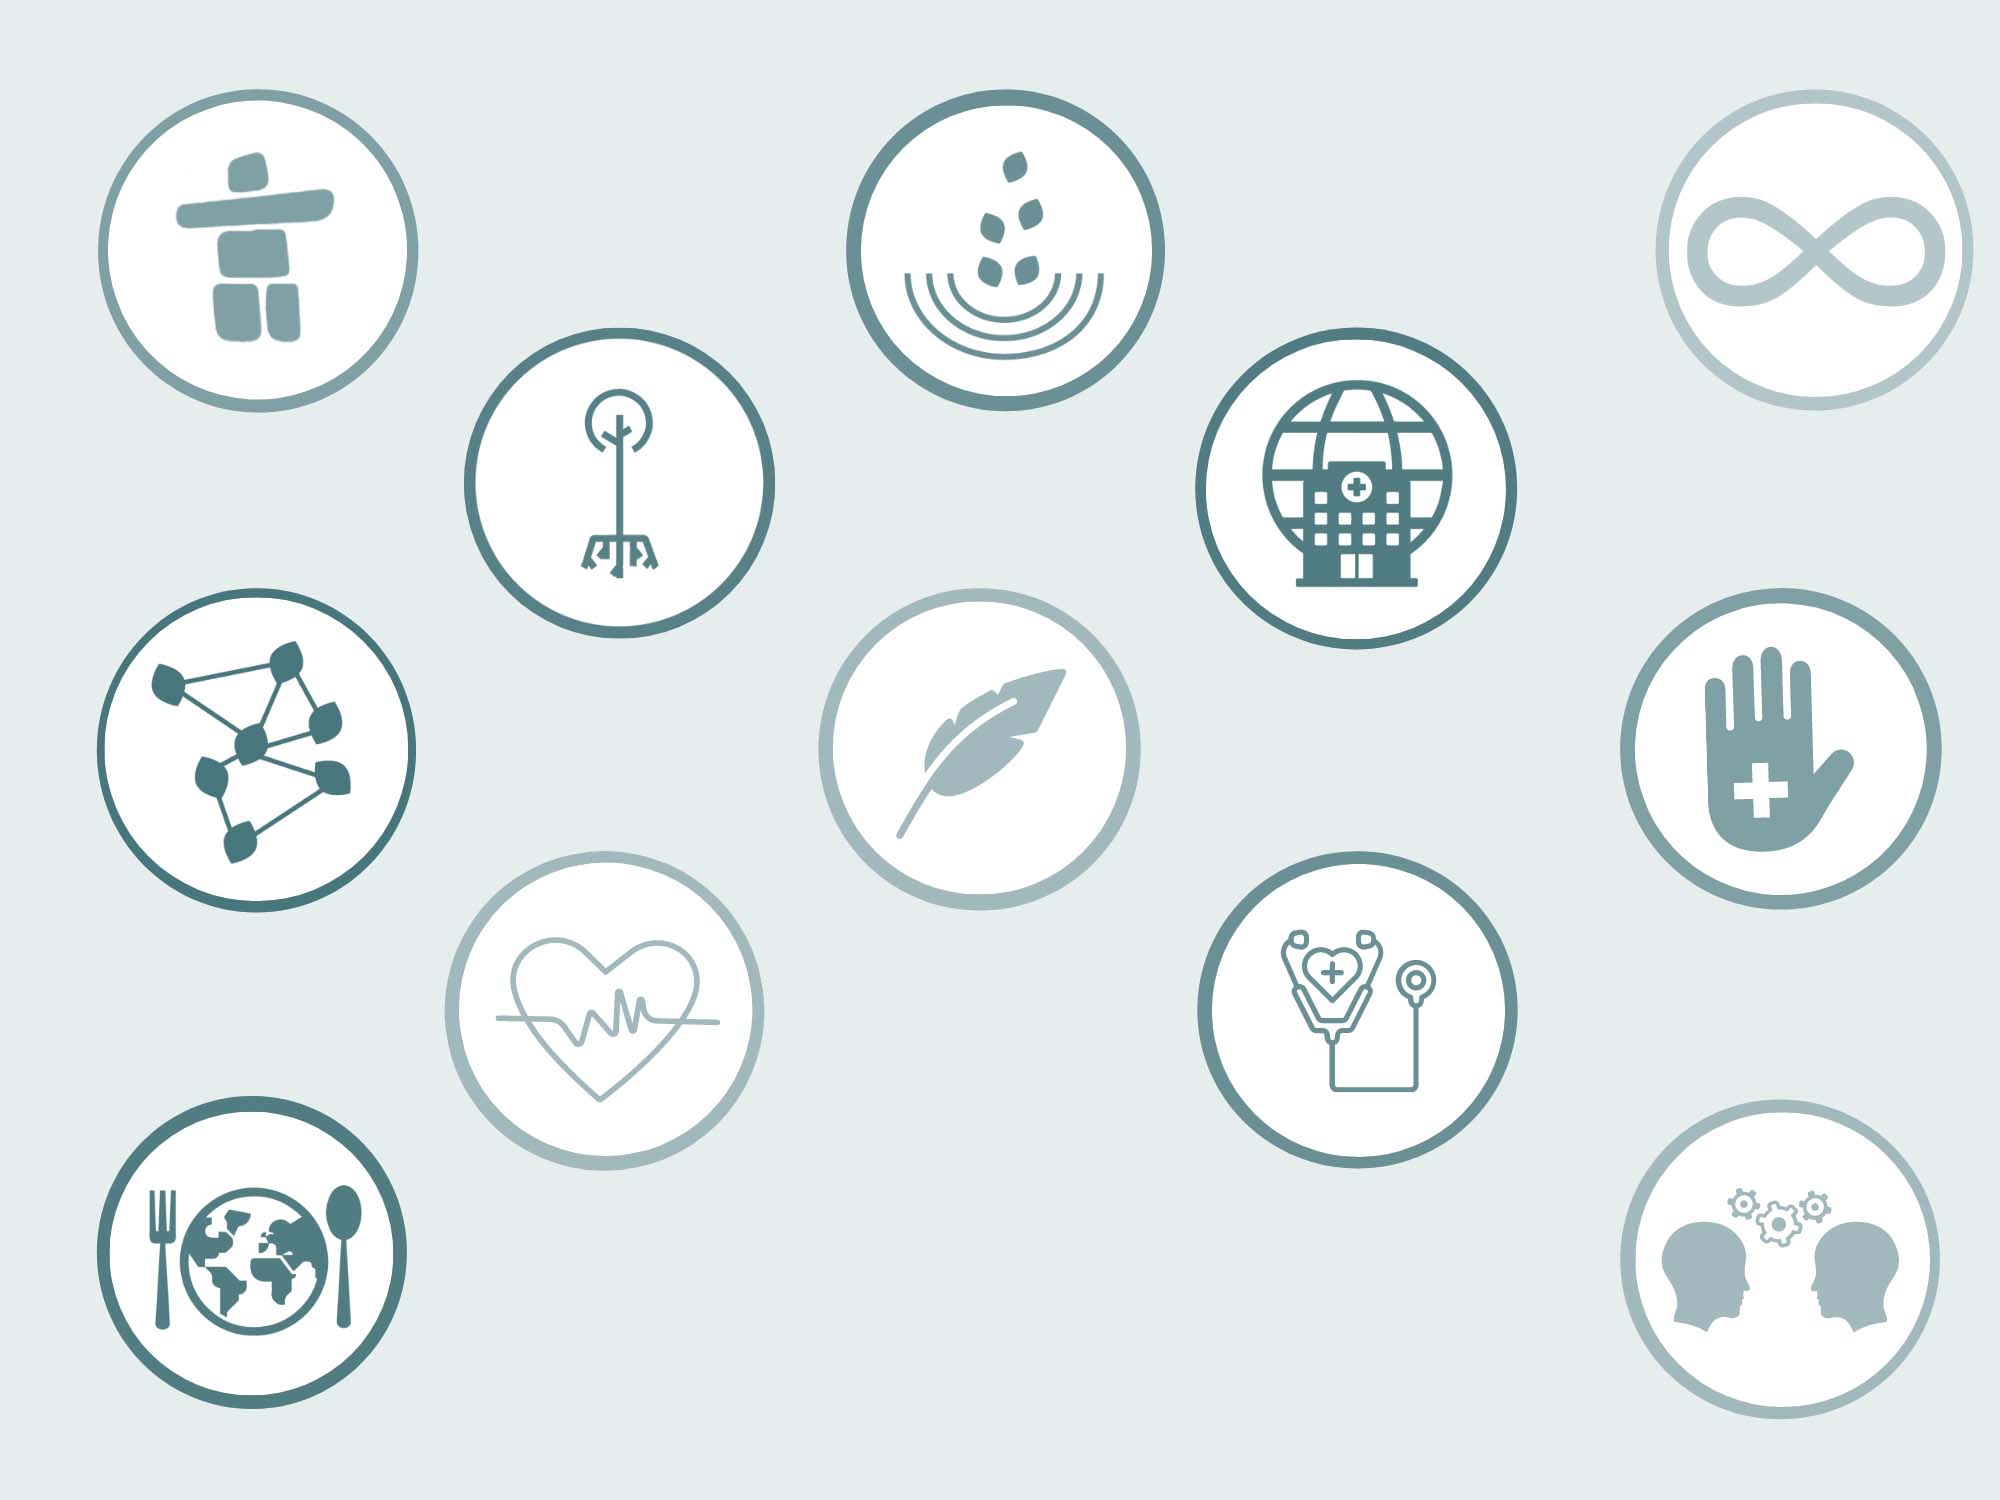 Anchor Cohort launch icons